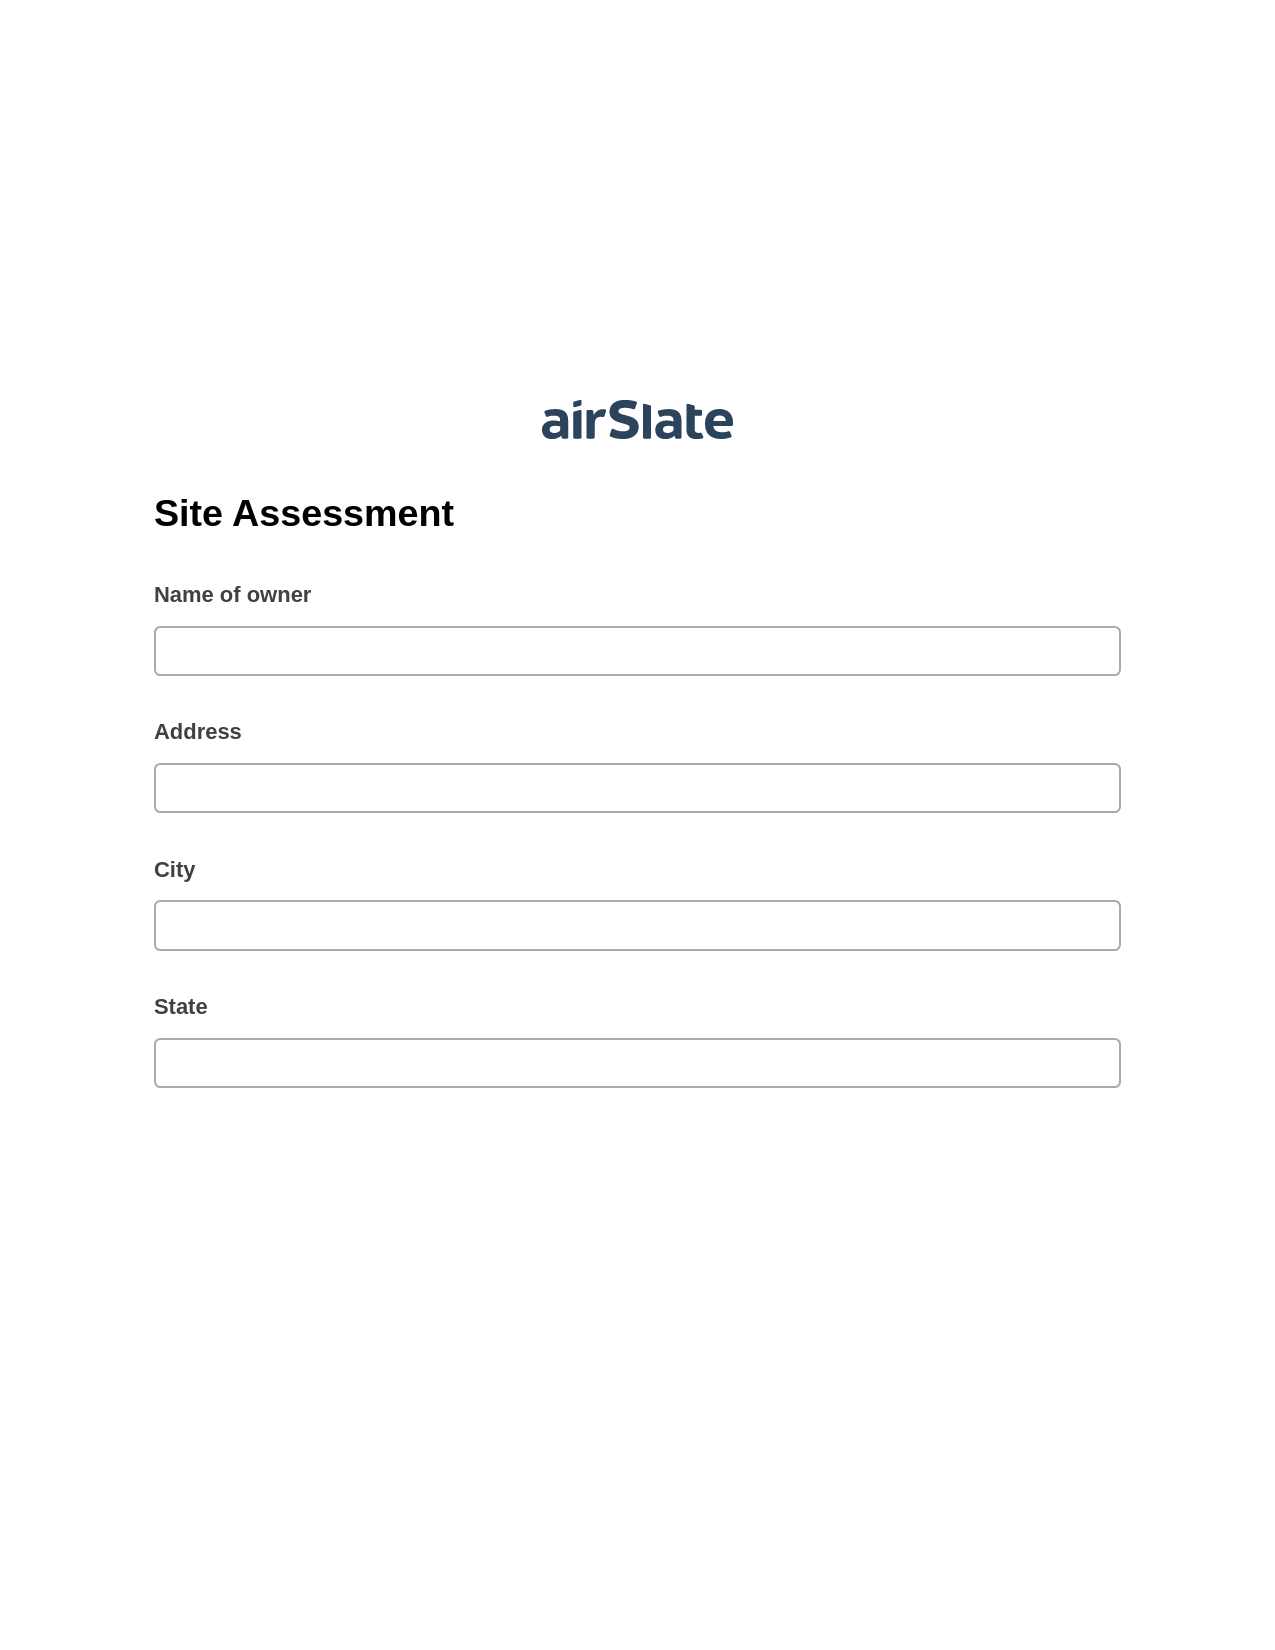 Site Assessment Pre-fill from MySQL Dropdown Options Bot, Email Notification Bot, OneDrive Bot